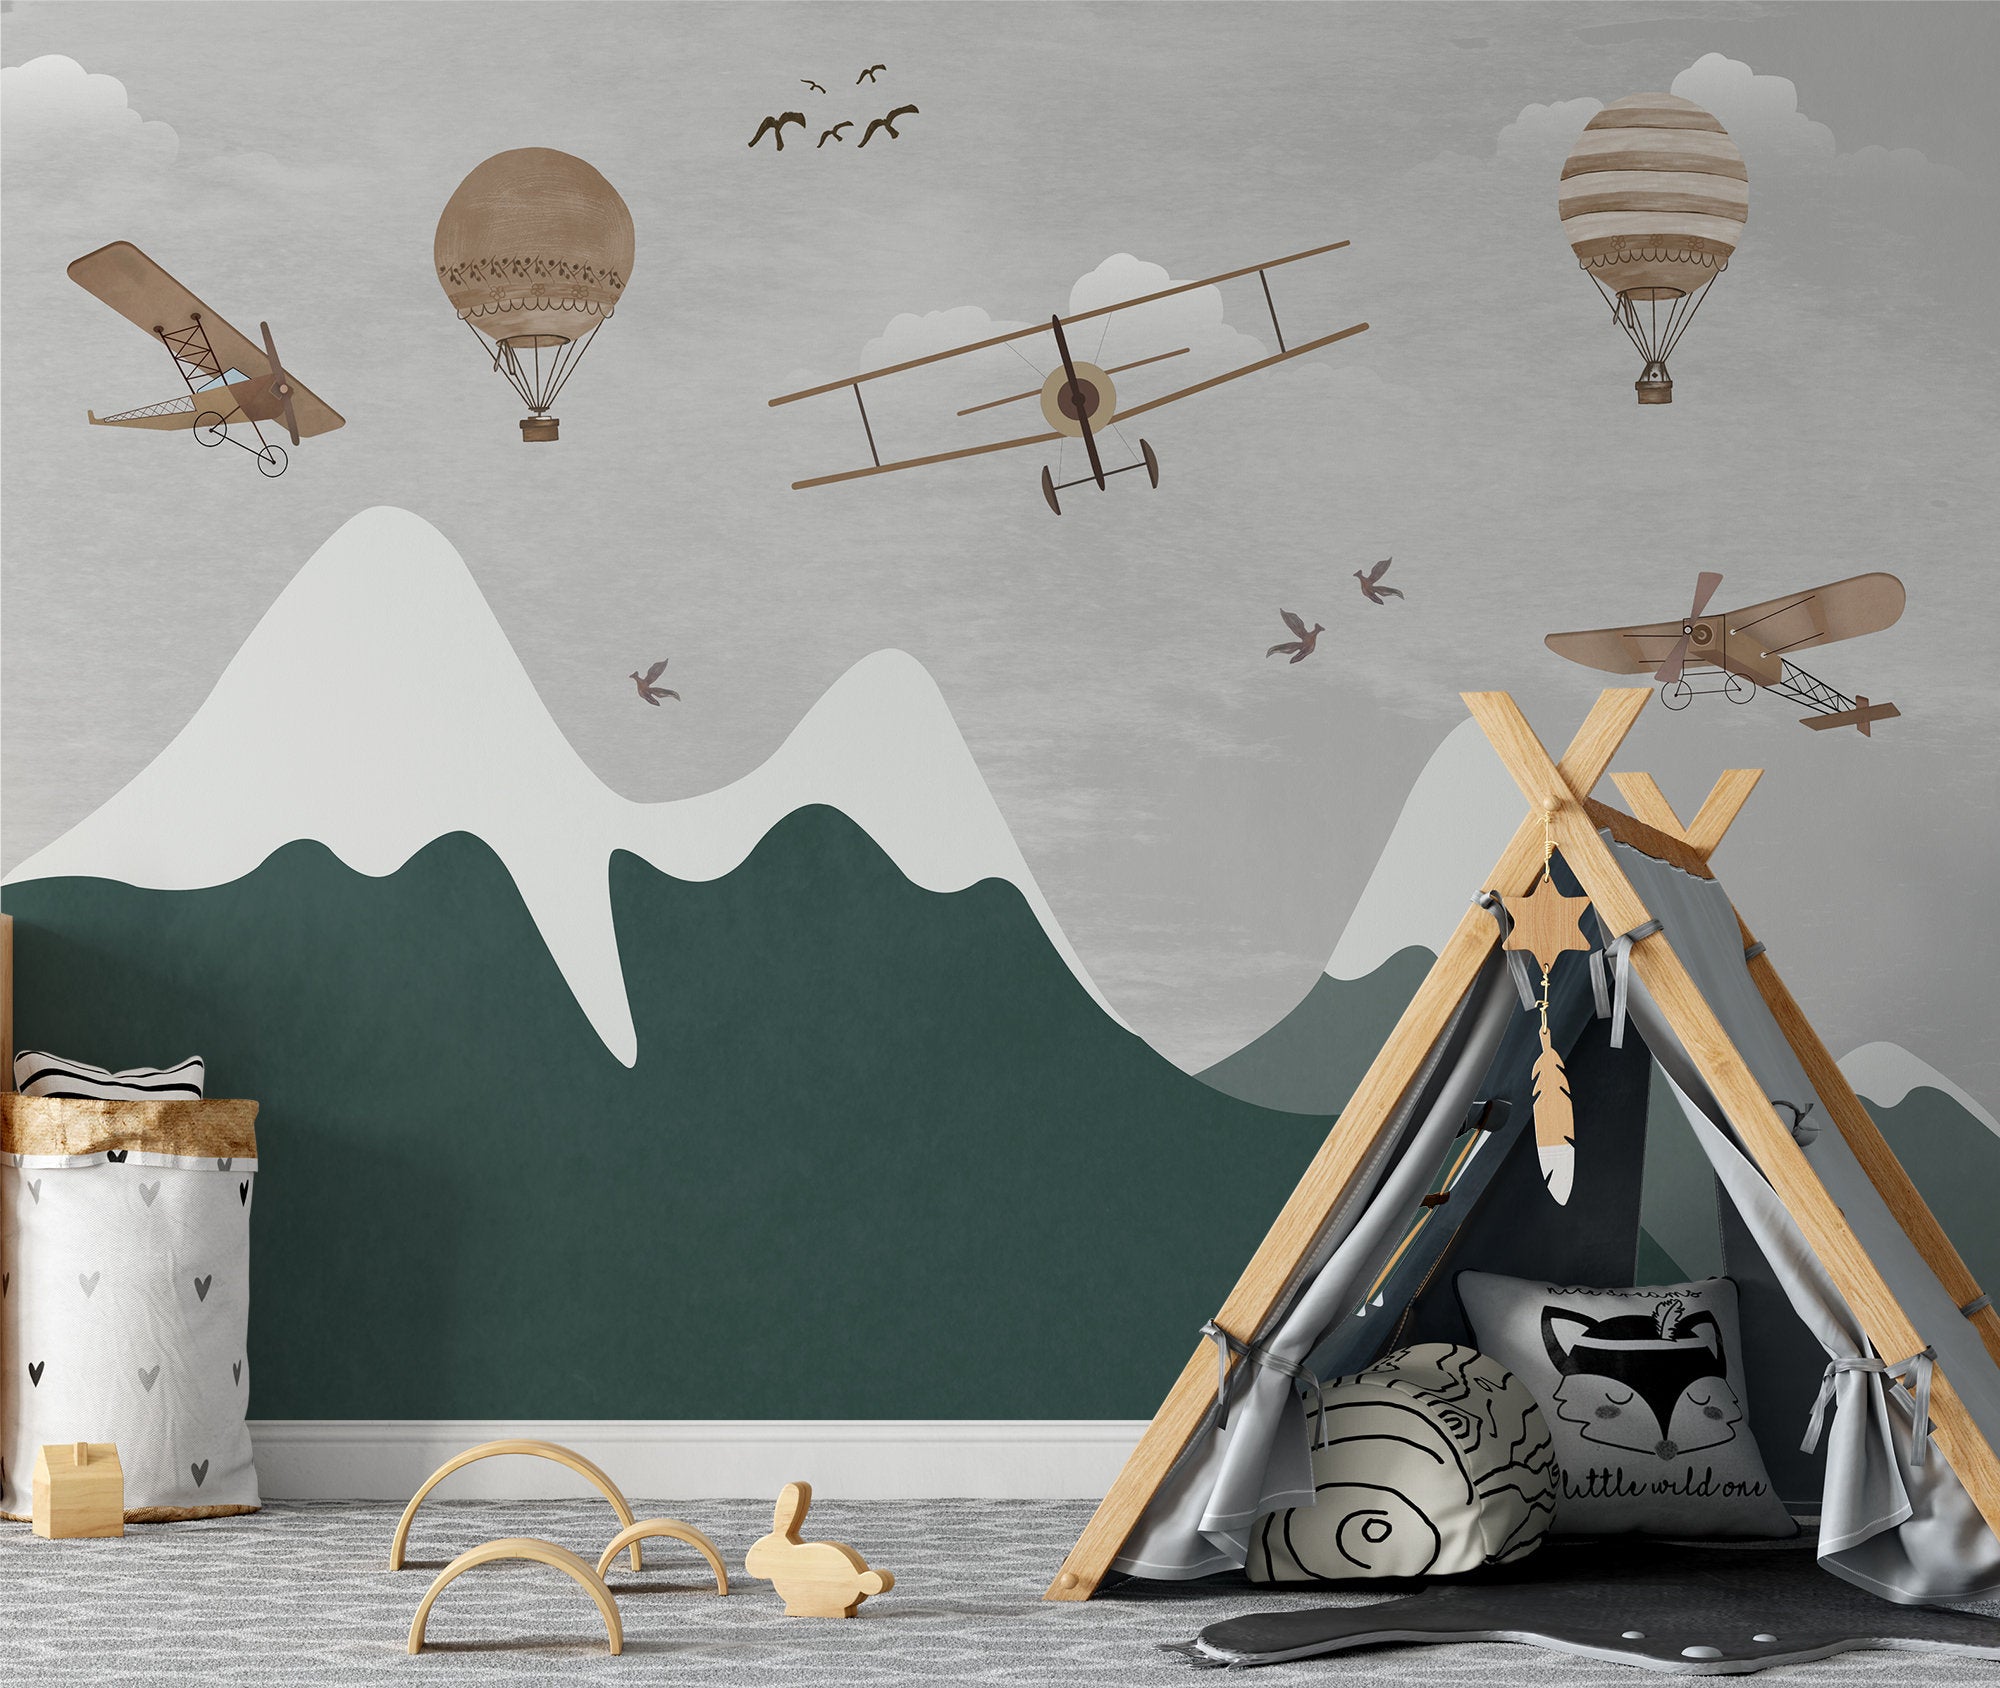 Air Balloons  Airplanes Snowy Mountains Wallpaper Self Adhesive Peel and Stick Wall Sticker Wall Decoration Removable